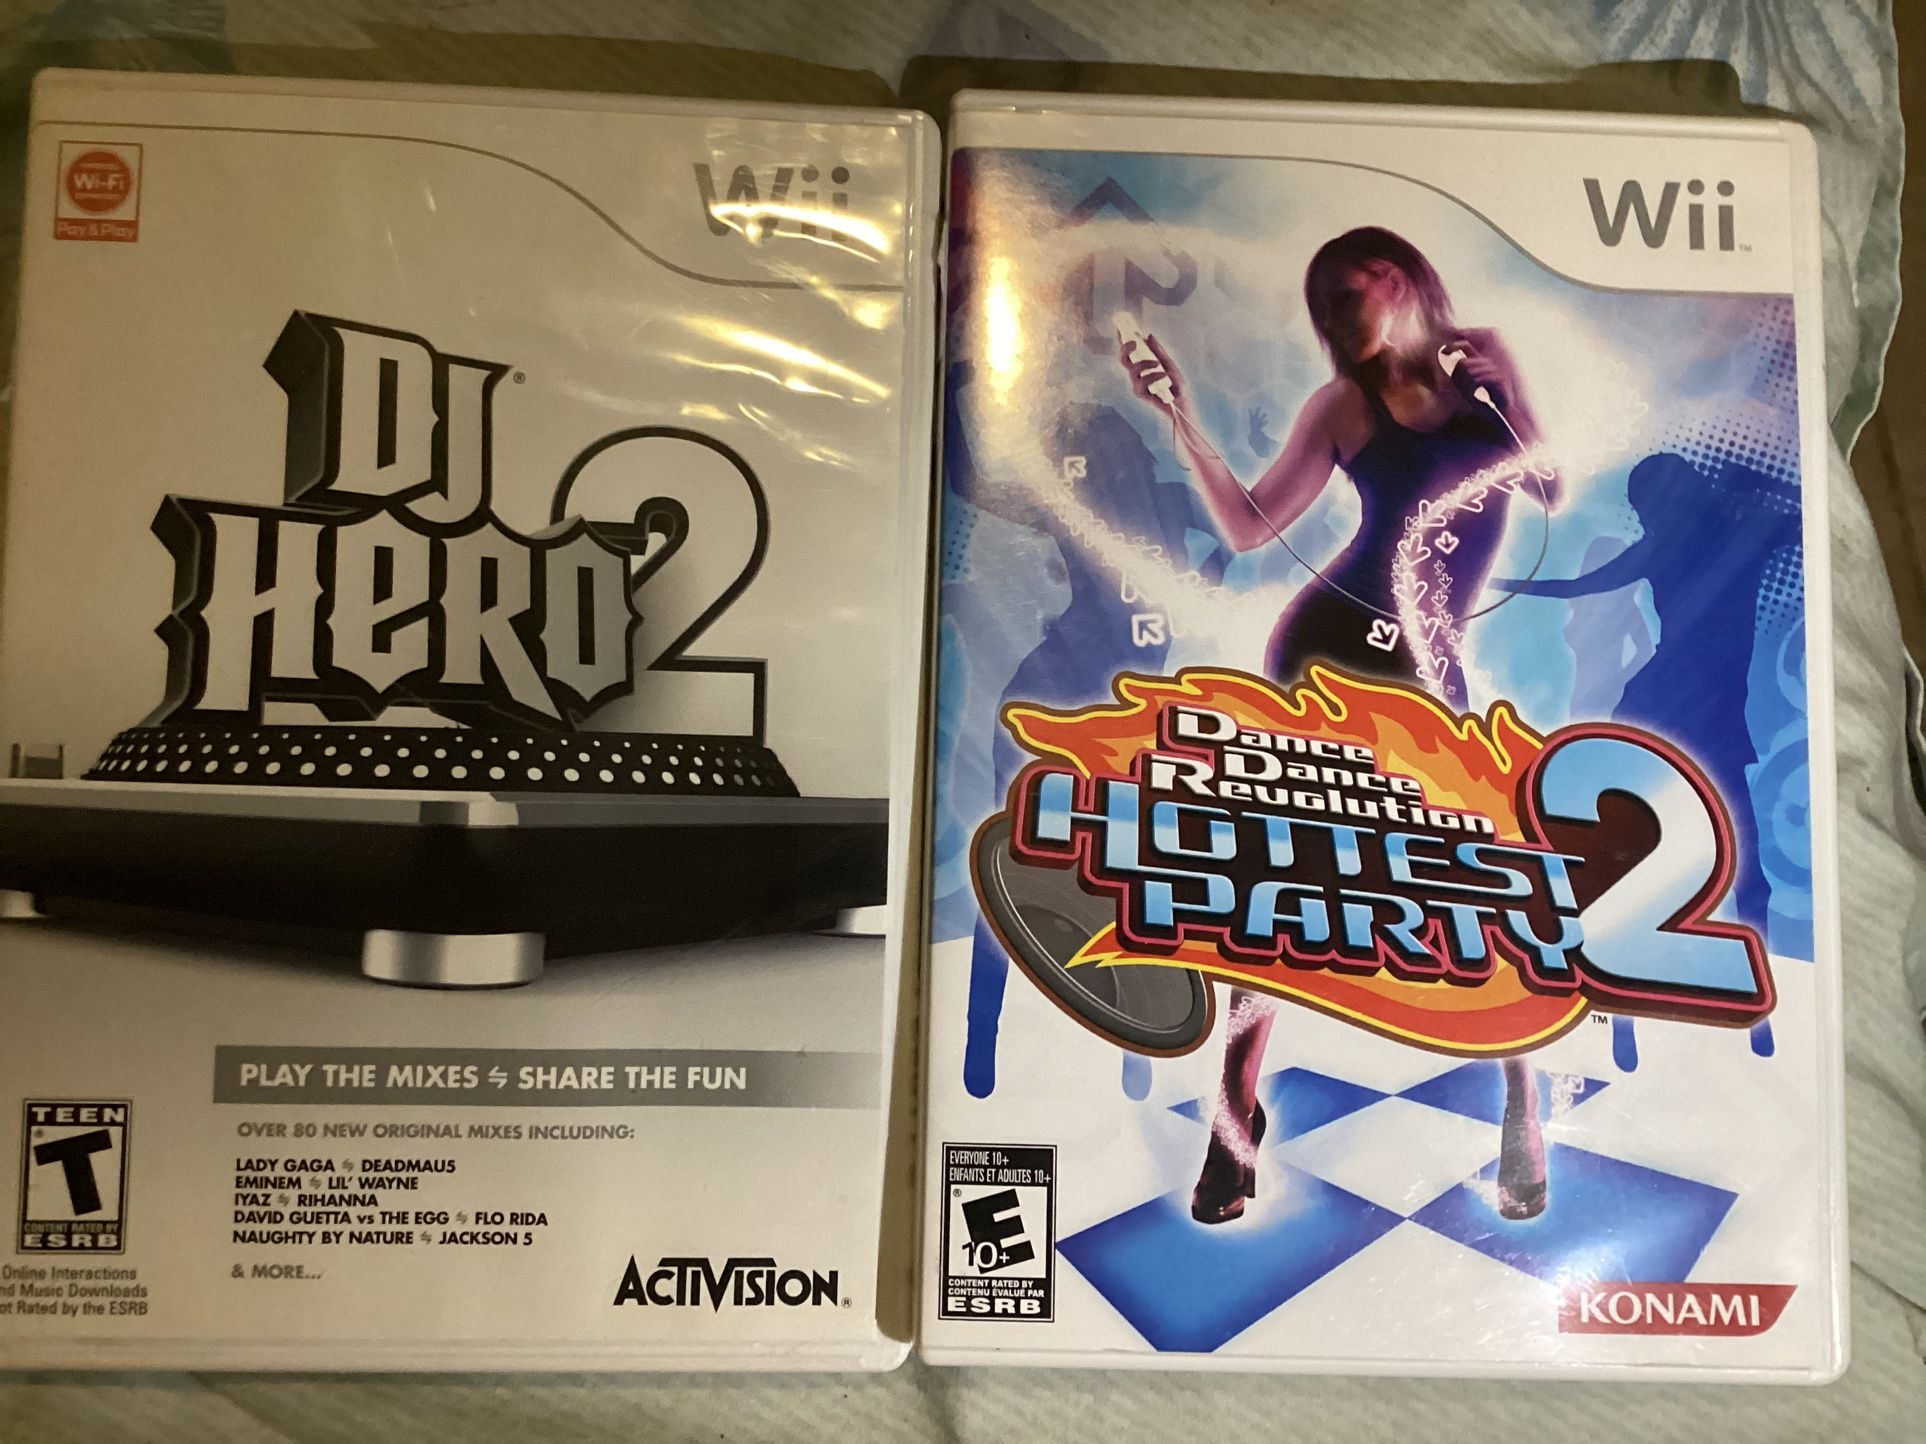 DJ Hero 2 and dance dance Revolution hottest party 2 for the Nintendo Wii